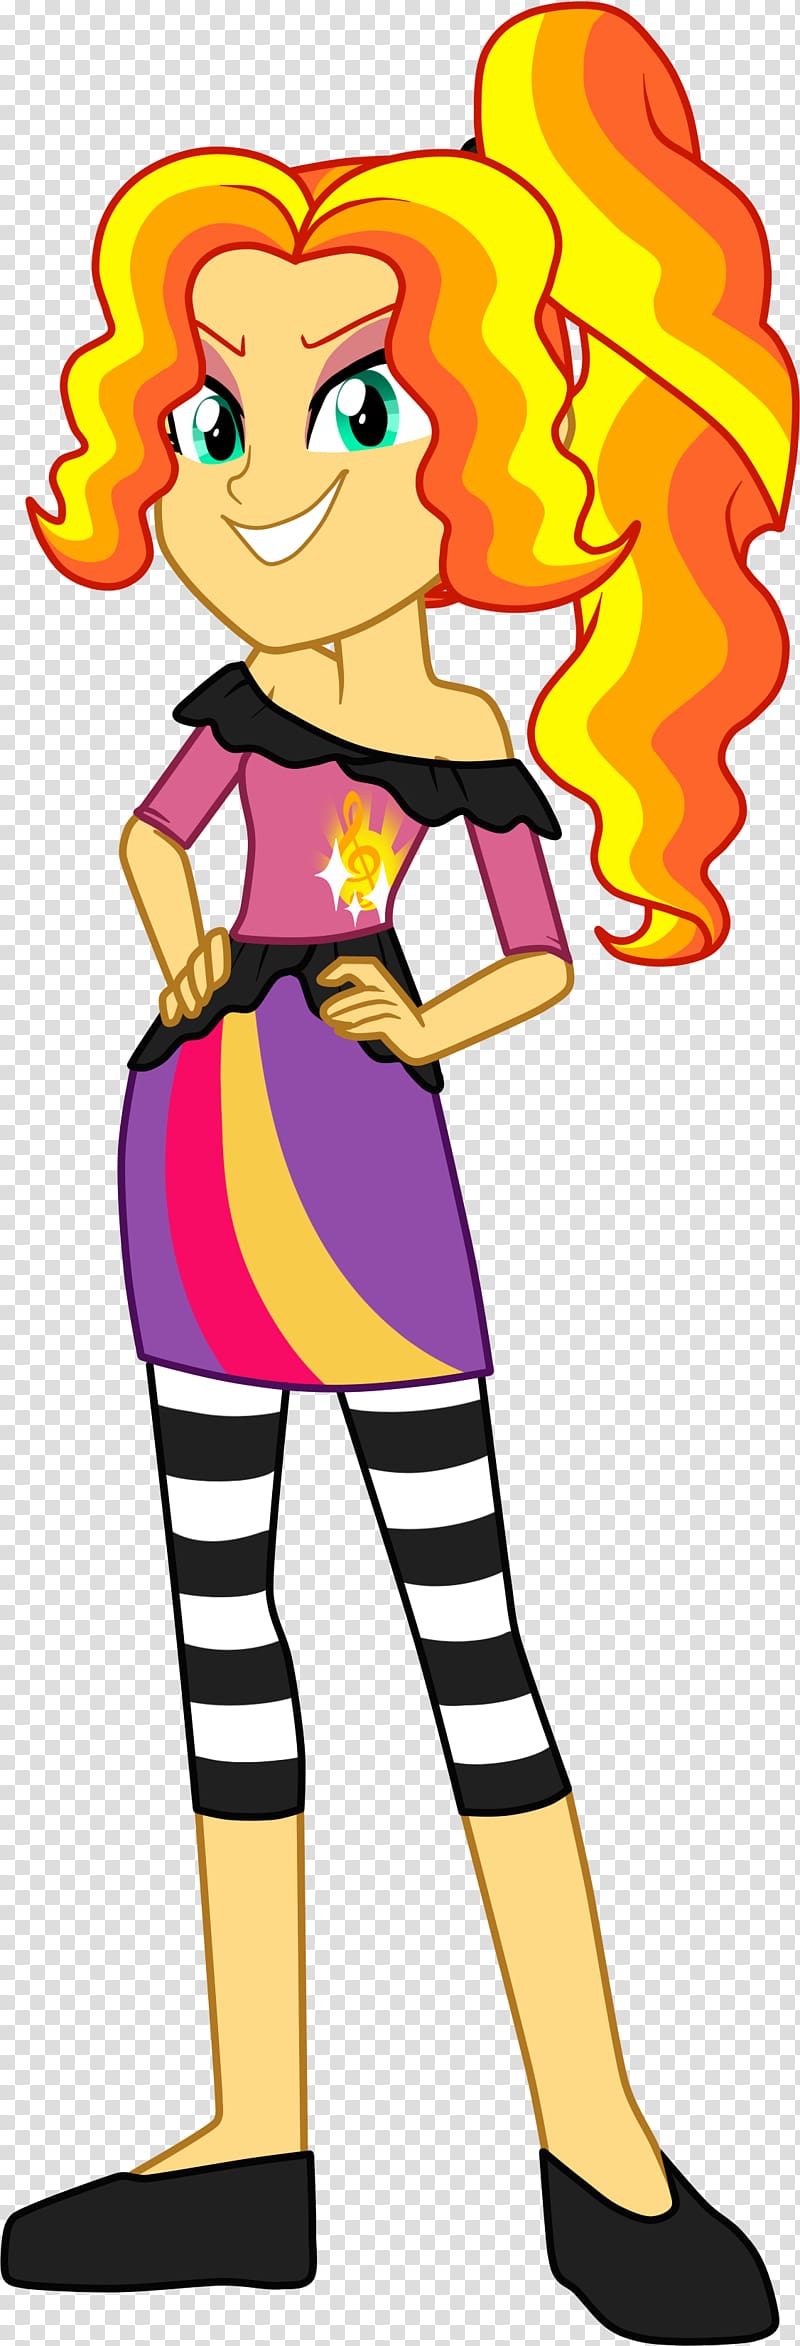 Sunset Shimmer Adagio Dazzle Female Pony Cutie Mark Crusaders, Next Gen transparent background PNG clipart